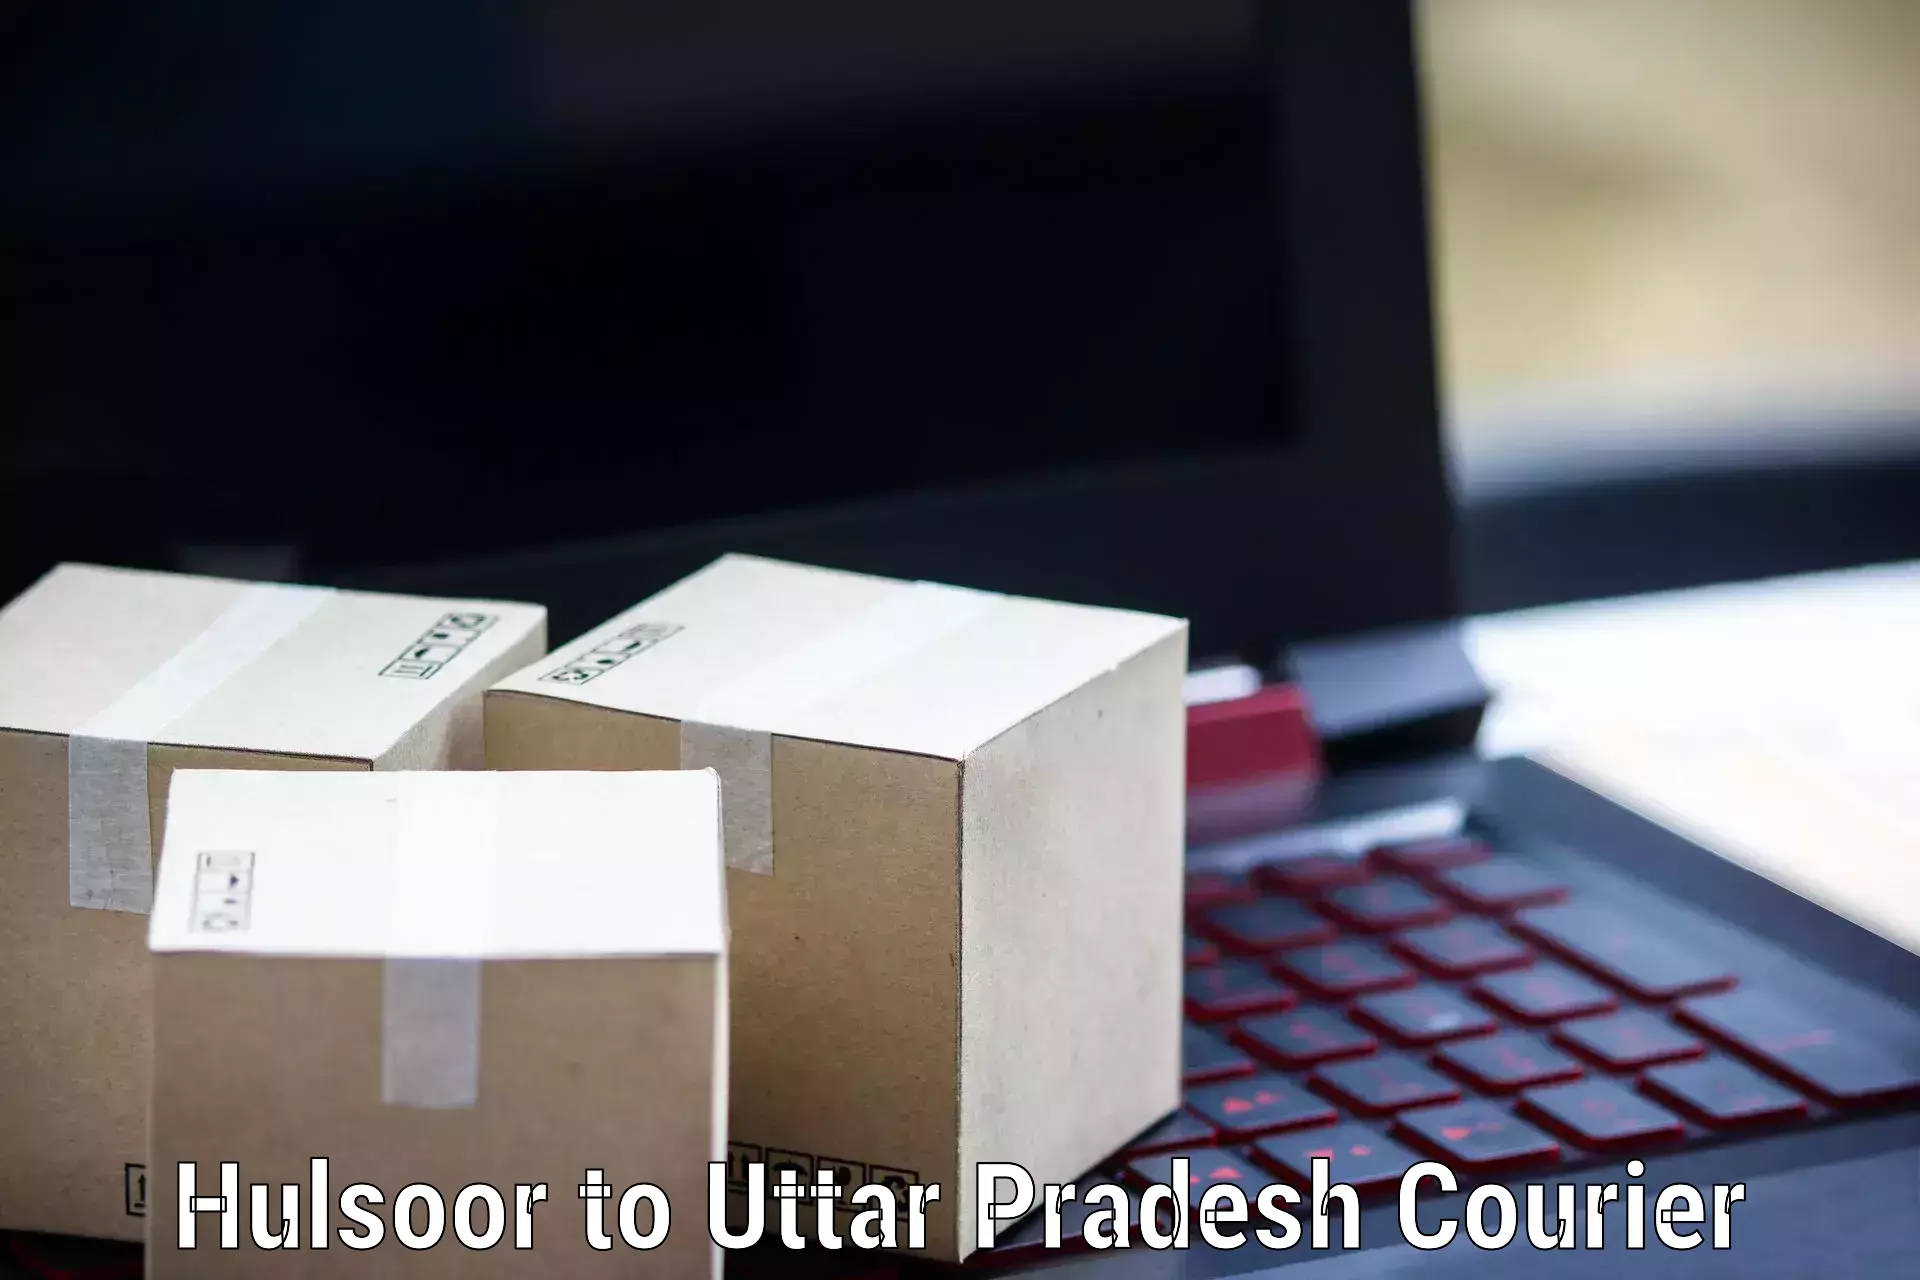 State-of-the-art courier technology Hulsoor to Vrindavan